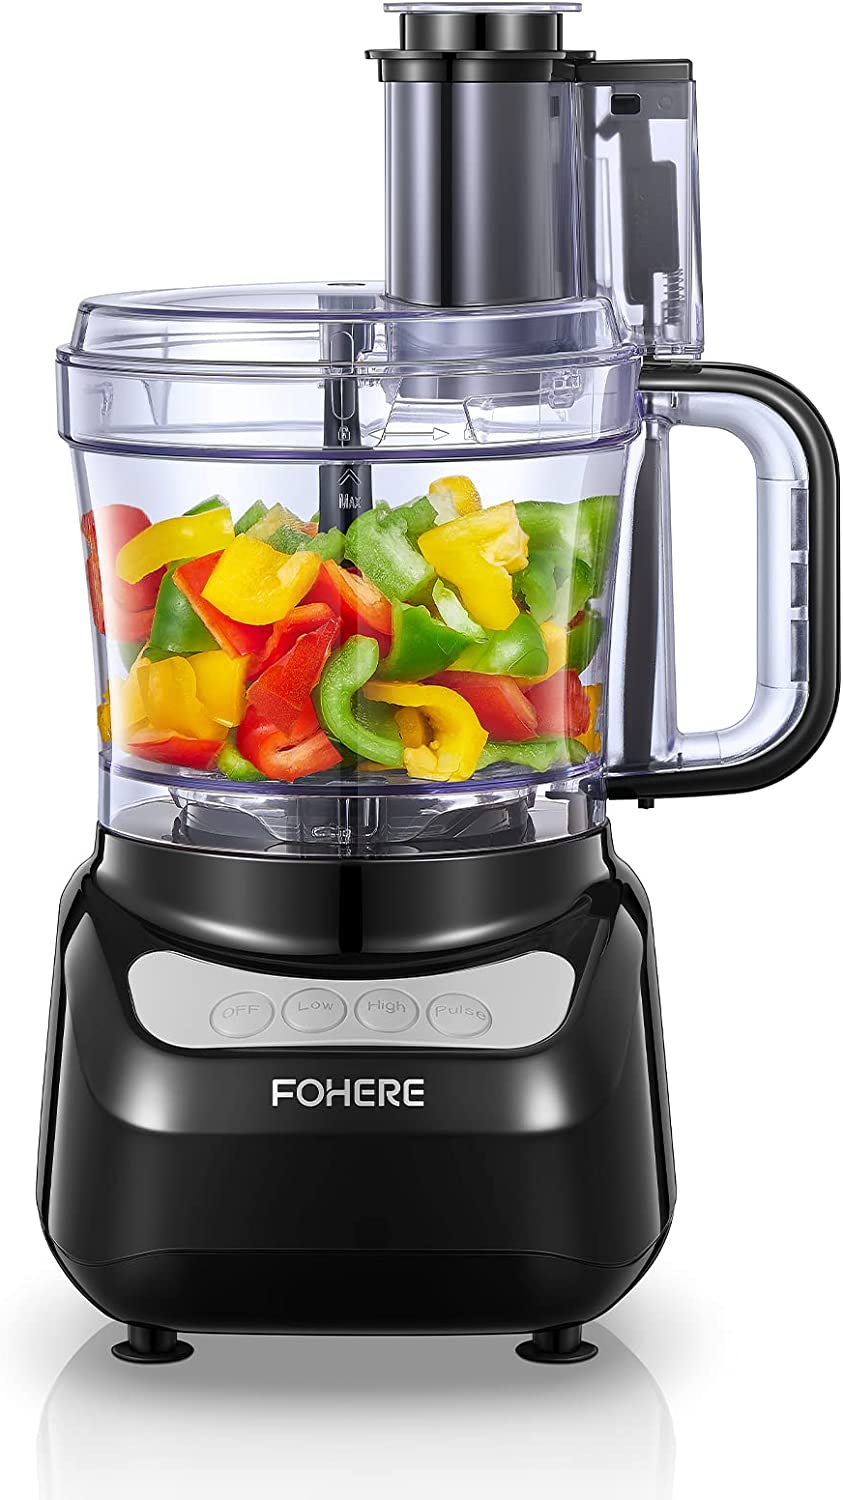  FOHERE Food Processor, 12 Cup, 2-in-1 Feed Chute